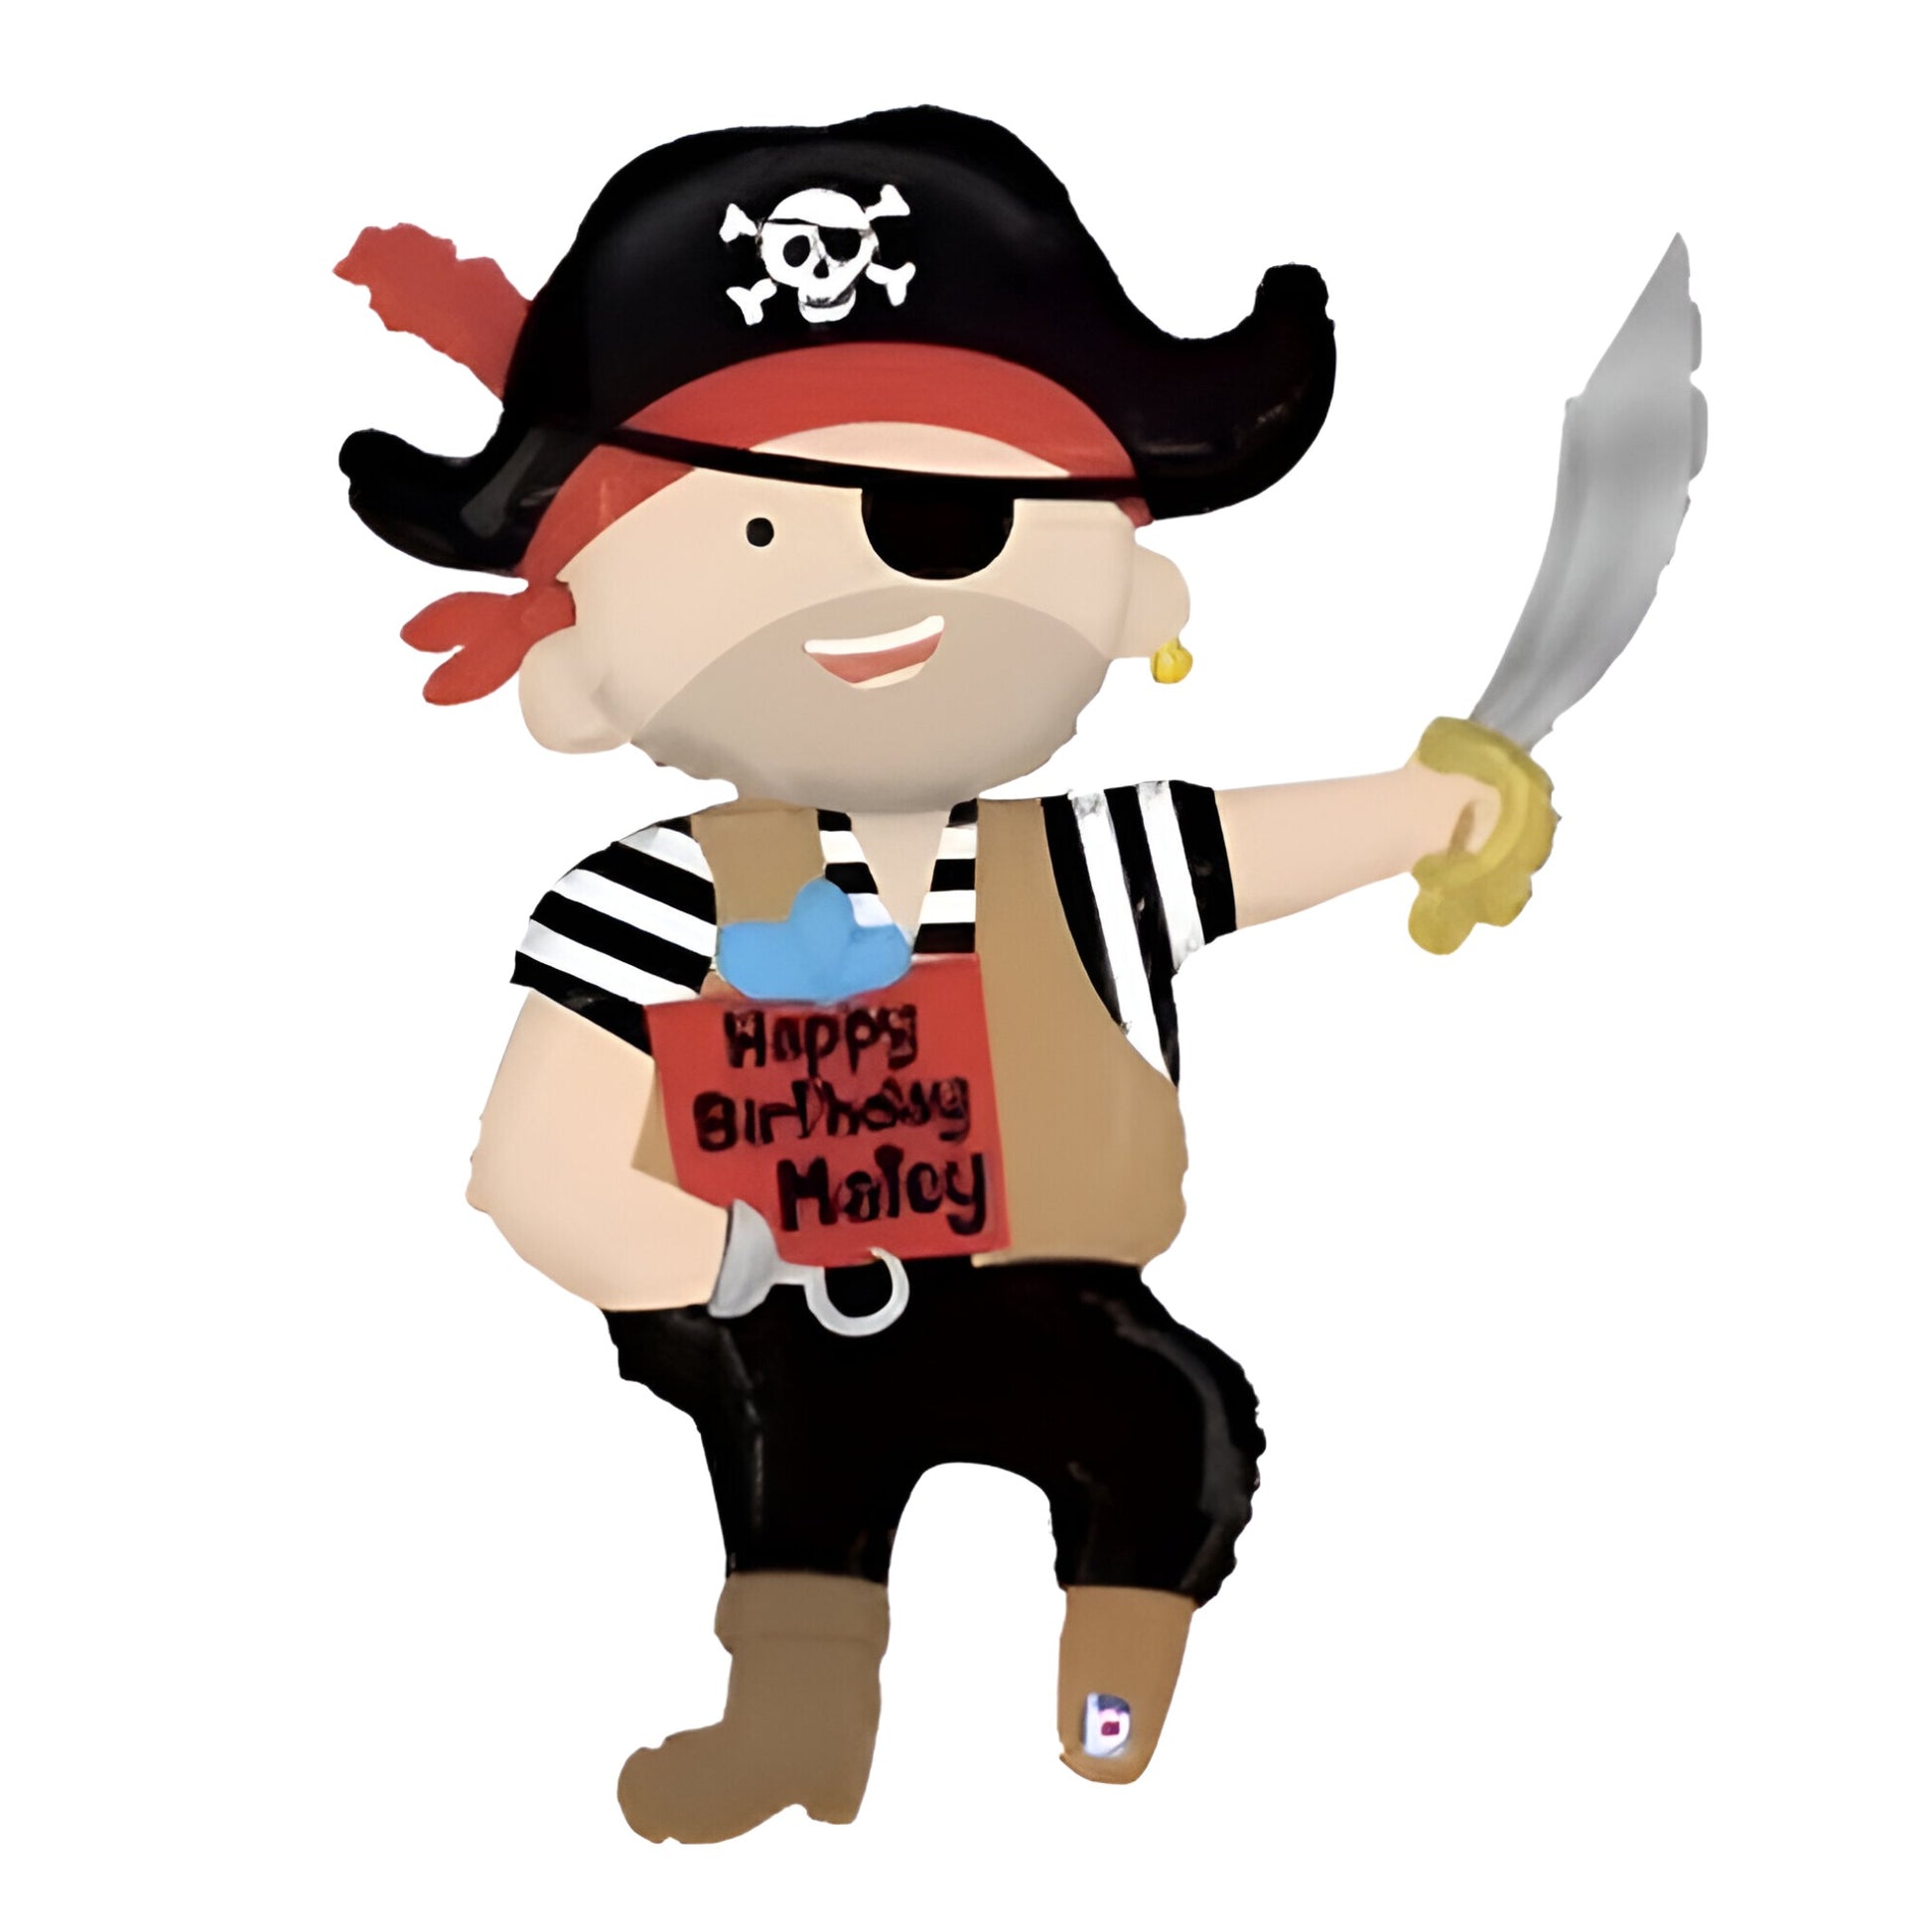 Giant Pirate shaped balloon holding sword with eye patch and hook hand. 